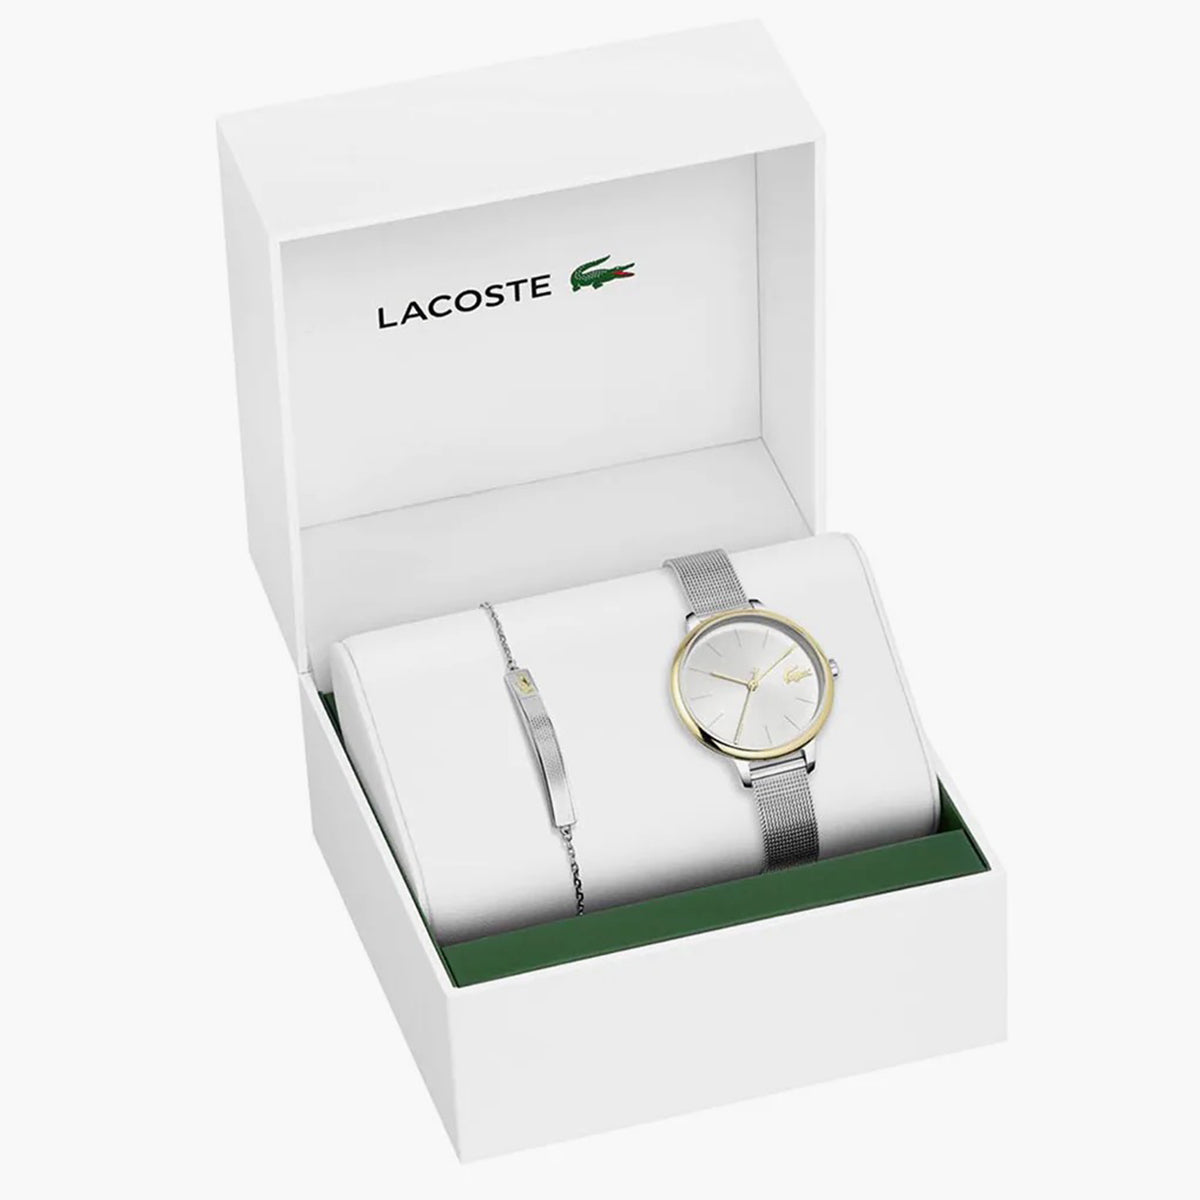 Lacoste - Cannes - 2070013